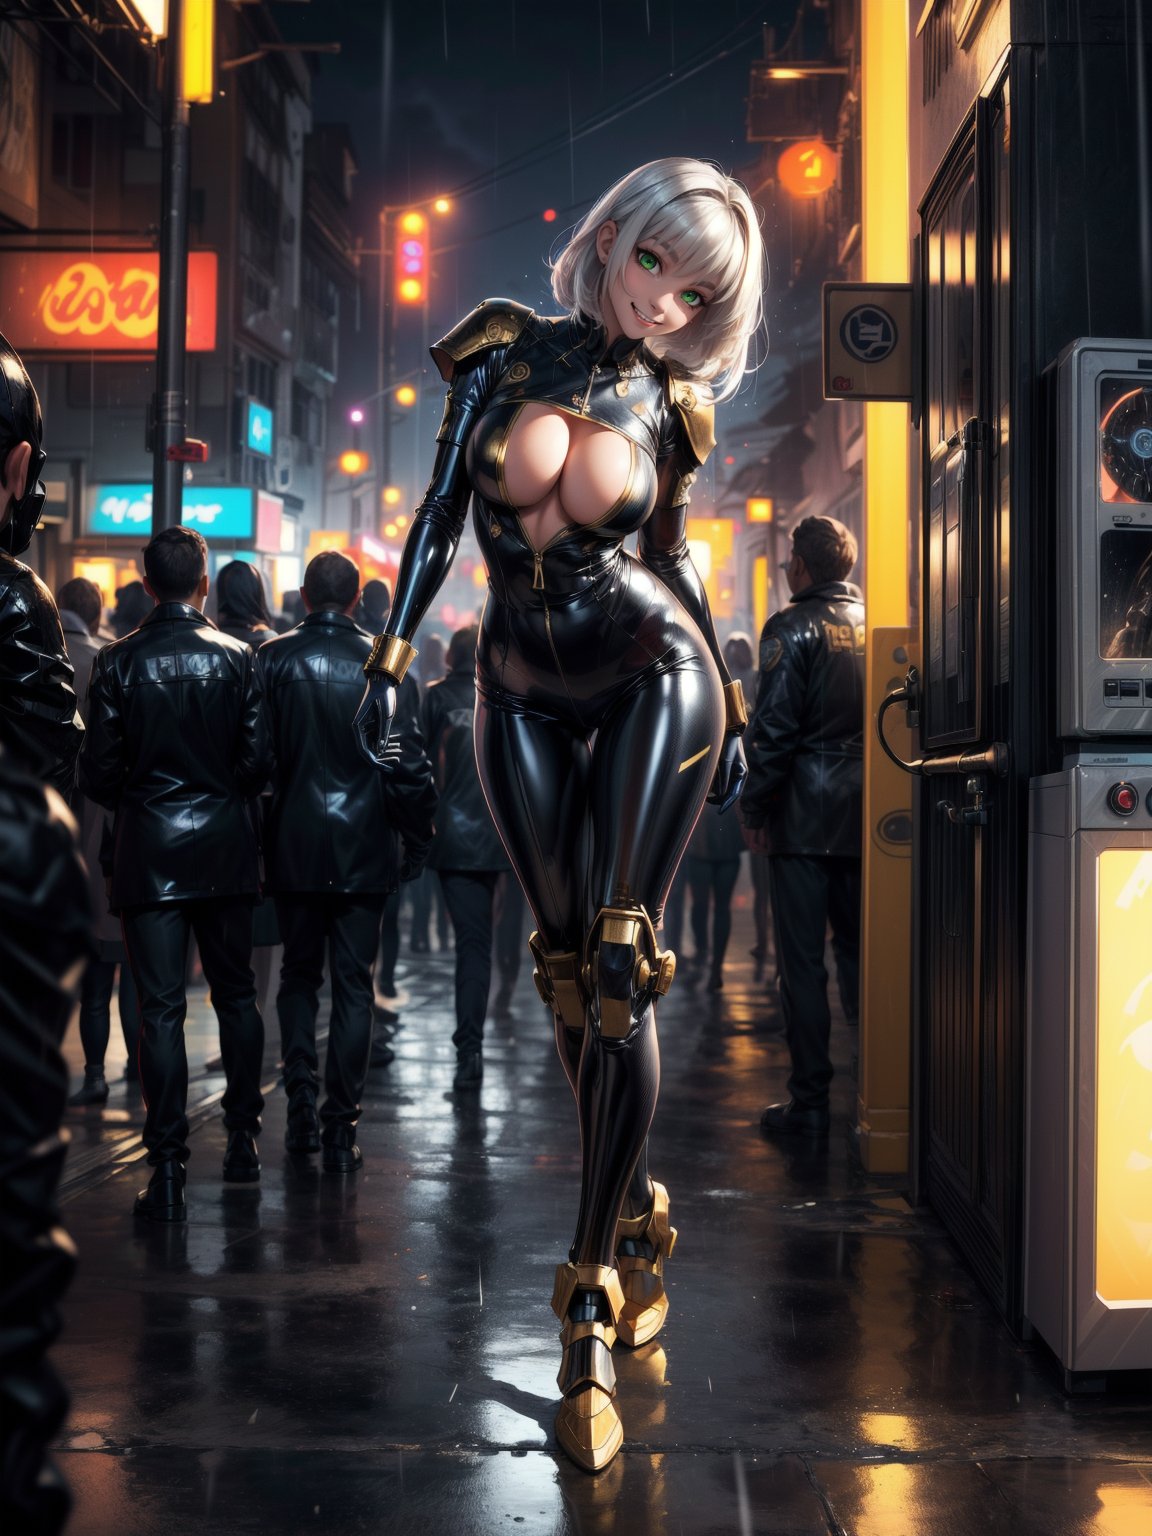 ((1woman)), ((wearing futuristic warrior clothing made of black latex, gold metals attached, extremely tight and short on the body)), ((flat silver hair, hair with bangs in front of the eye)), ((gigantic breasts)), ((staring at the viewer)), (((making erotic position leaning against an object))), ((in a futuristic city, giant robots, lampposts, raining hard, soda machines,  multiple people with different ethnicities)), ((((full body)))), 16k, UHD, better quality, better resolution, better detail, light and shadow effects